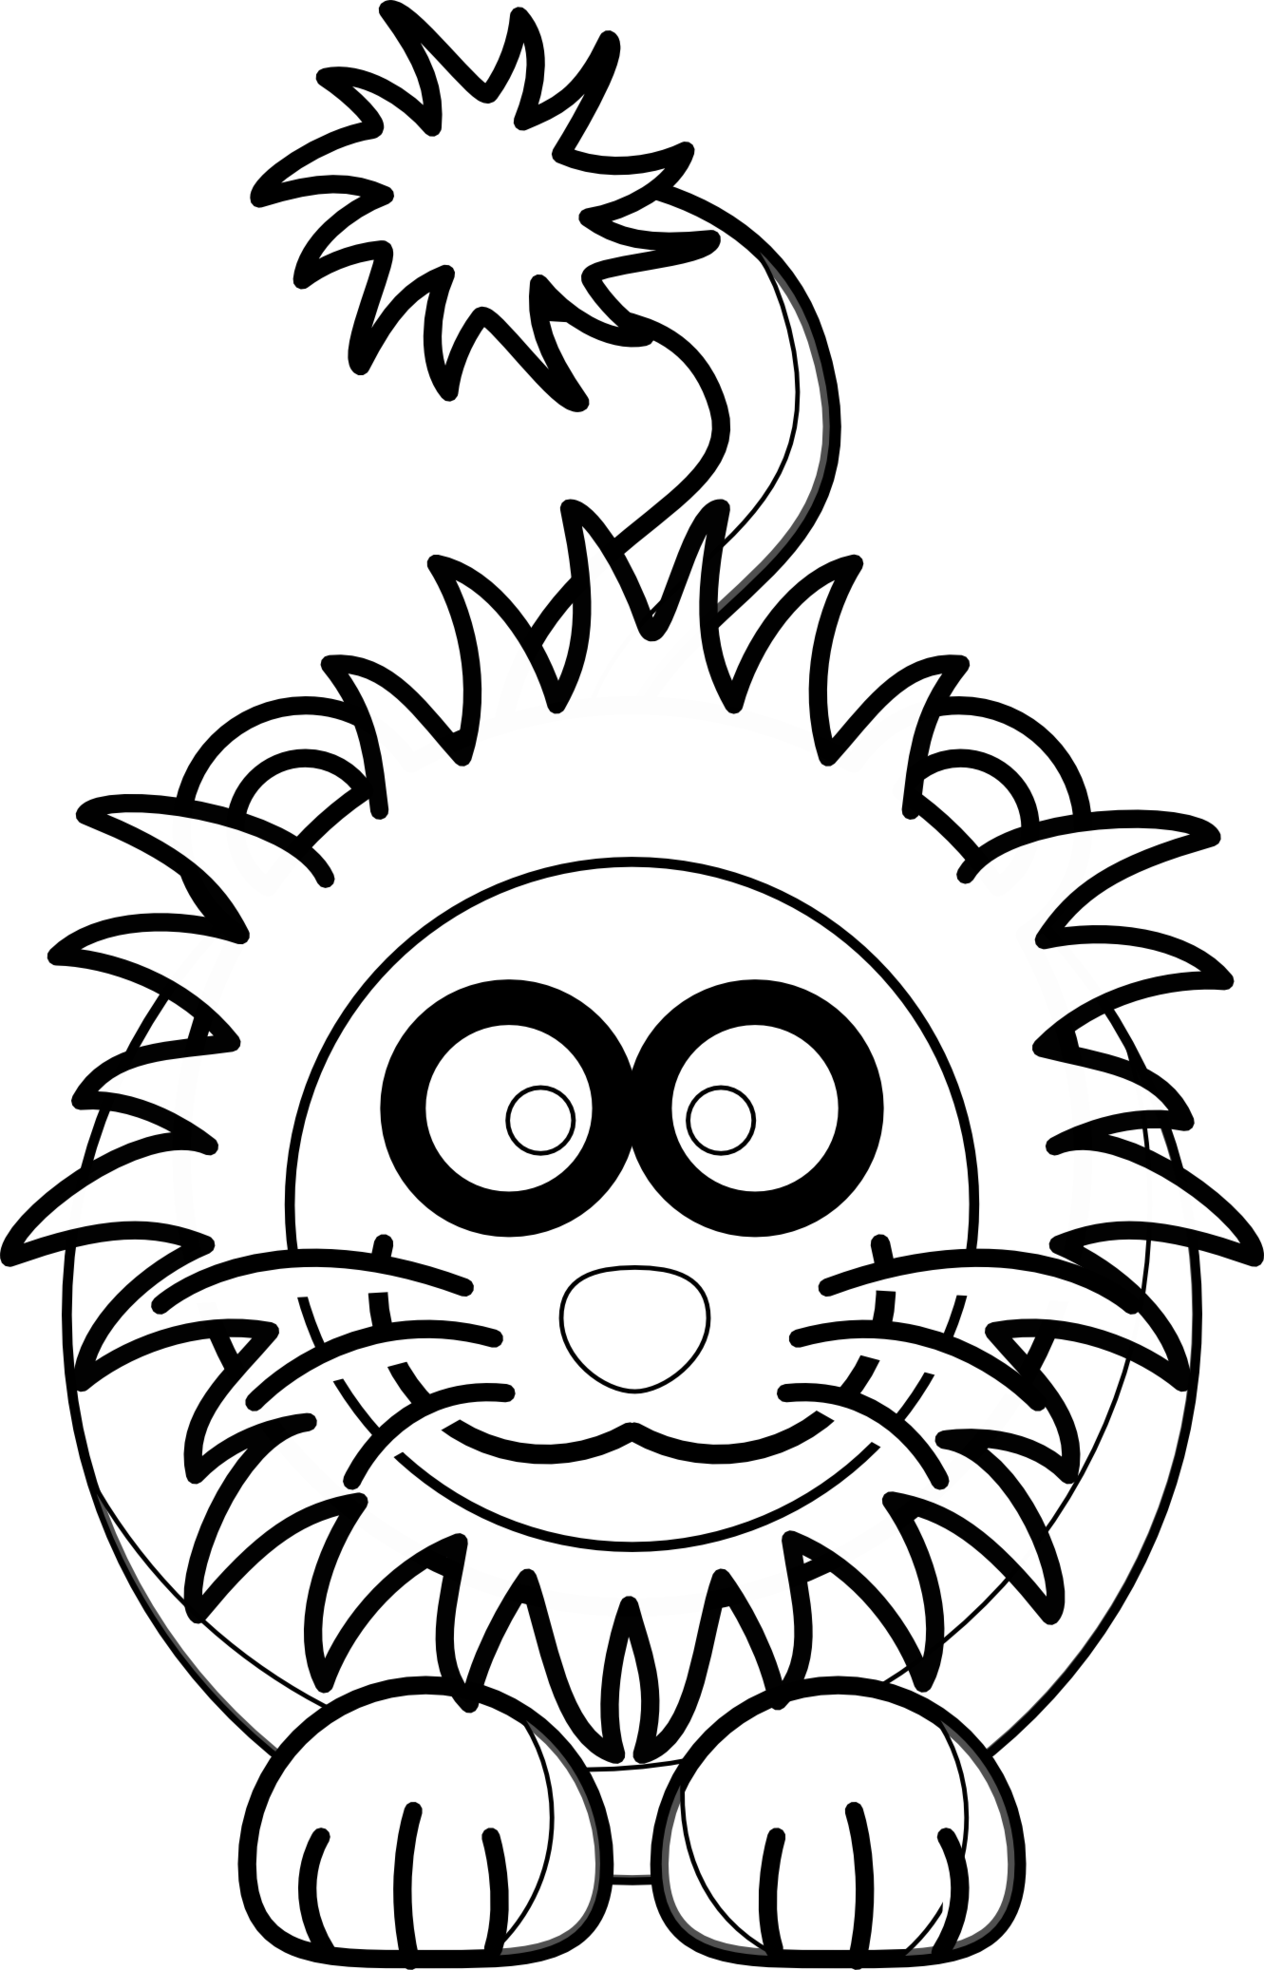 Lion black and white clip art black and white top clipart ...